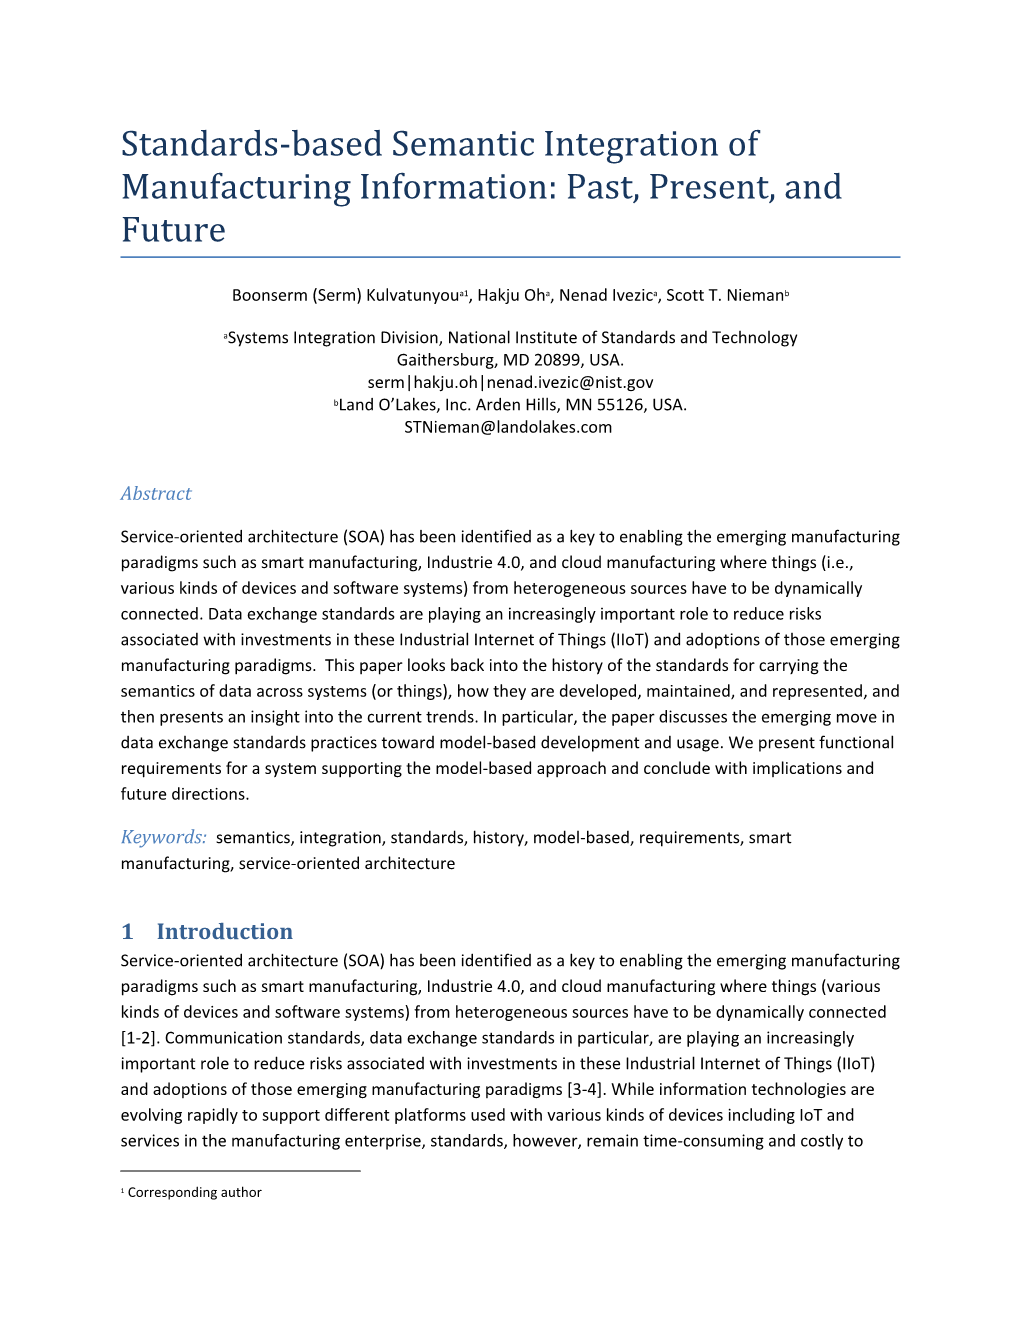 Standards-Based Semantic Integration of Manufacturing Information: Past, Present, and Future